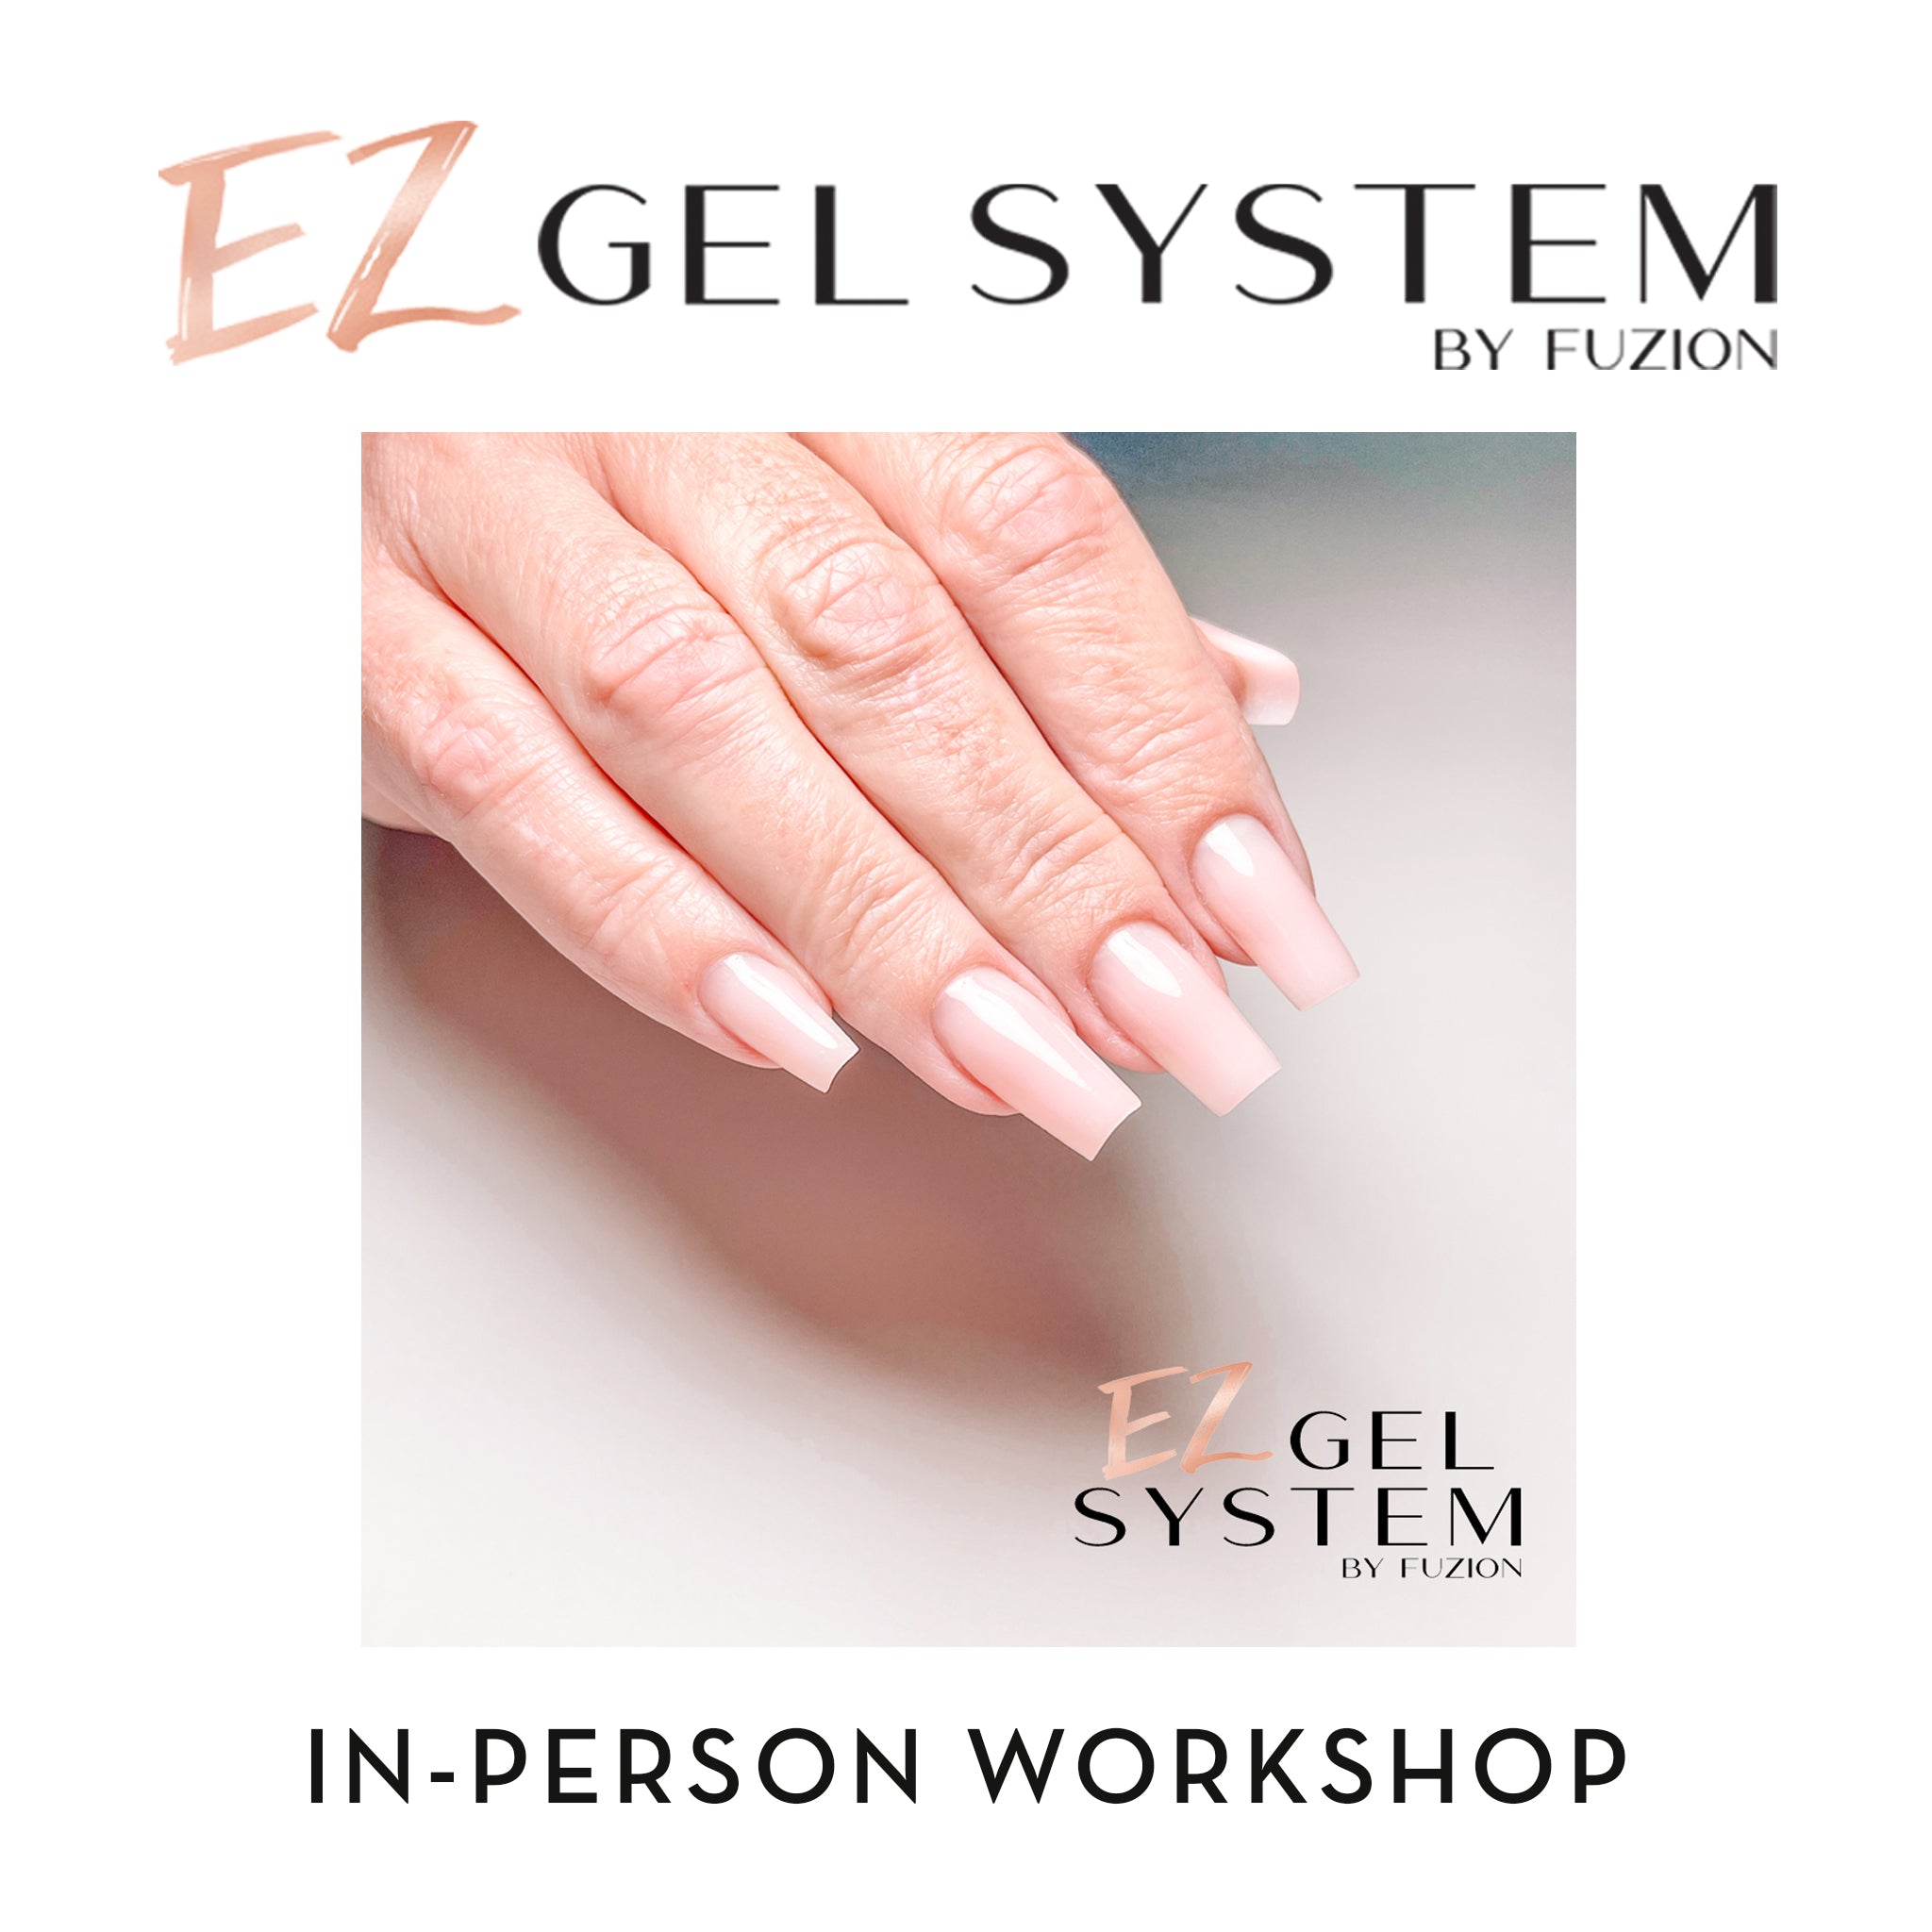 Learn Fuzion's new EZ Gel System!  - In-person Workshop